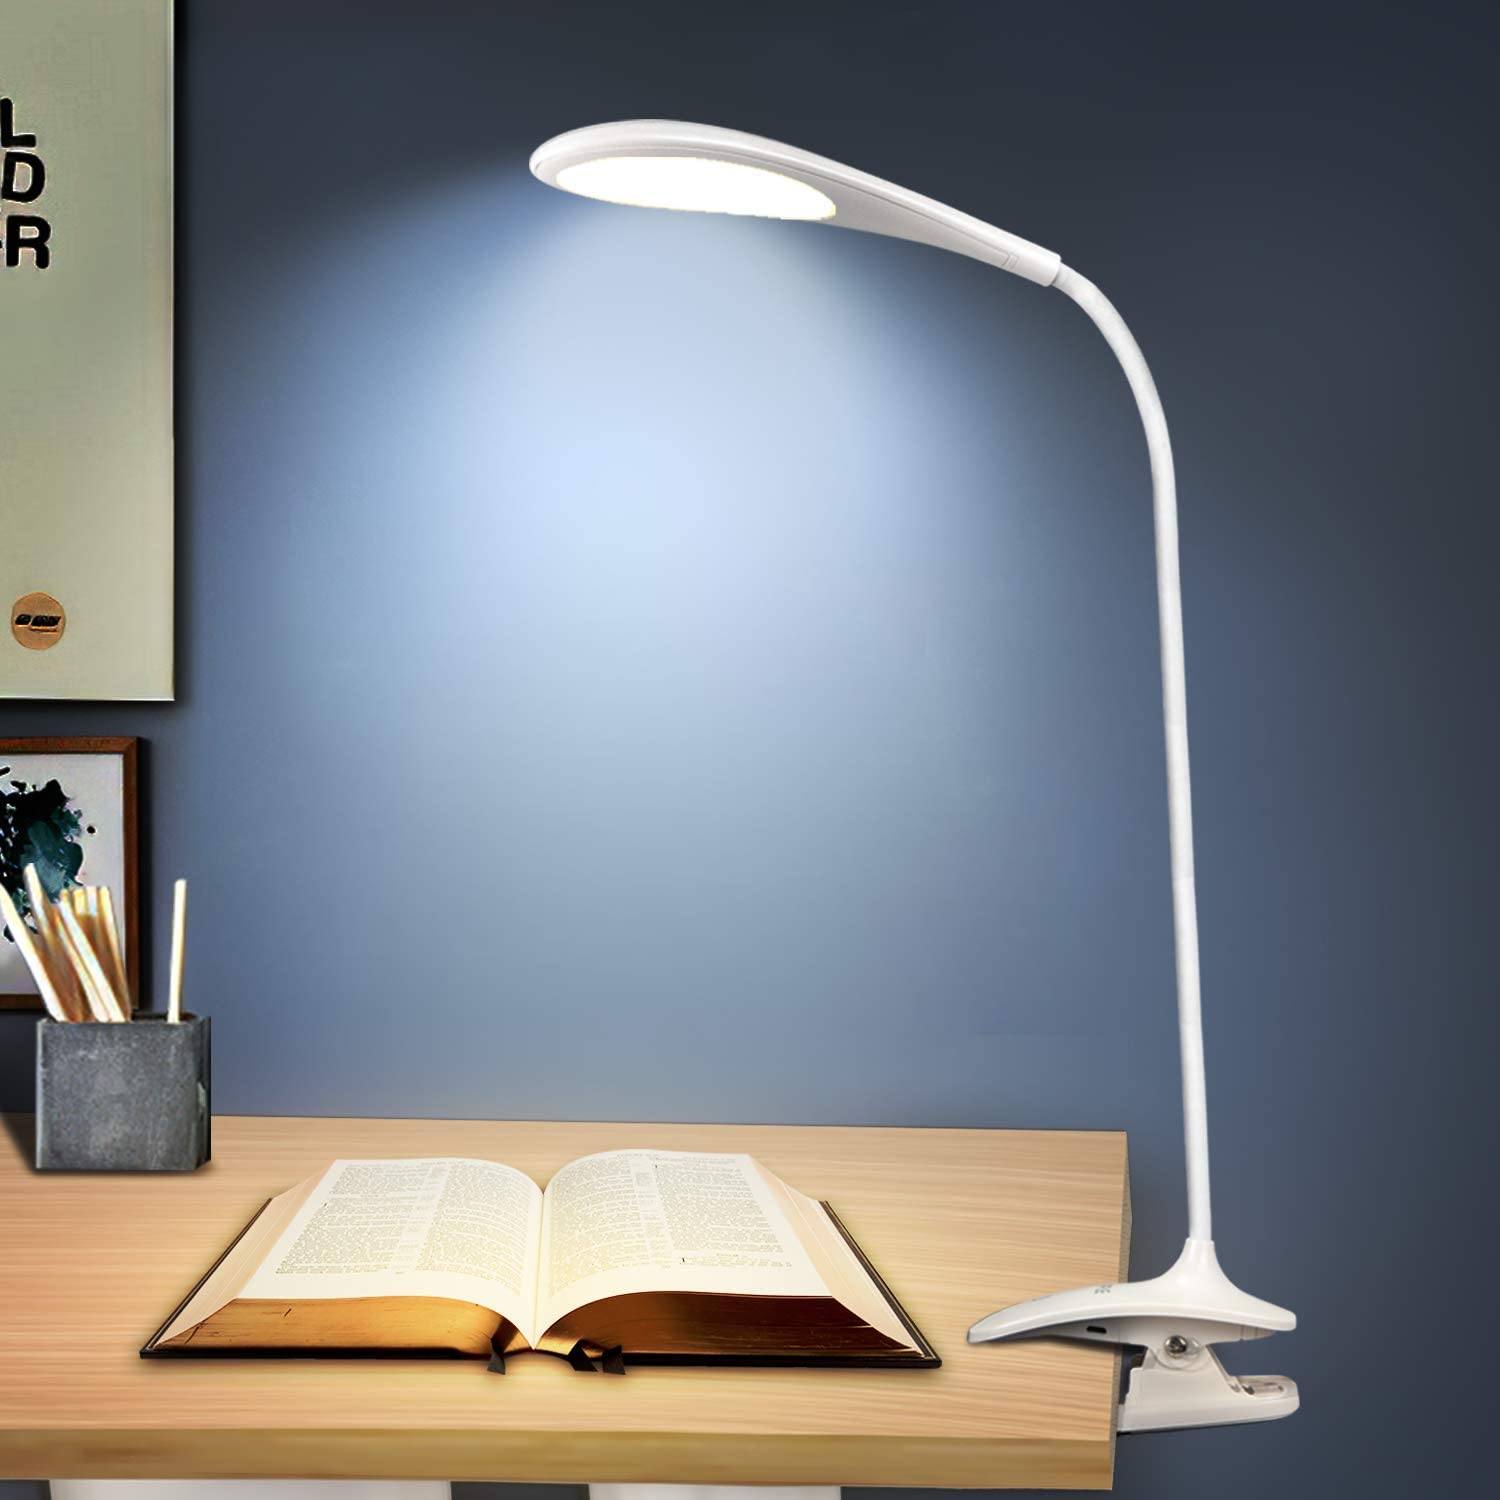 Best Table Lamp For Study Business, Best Reading Table Lamp